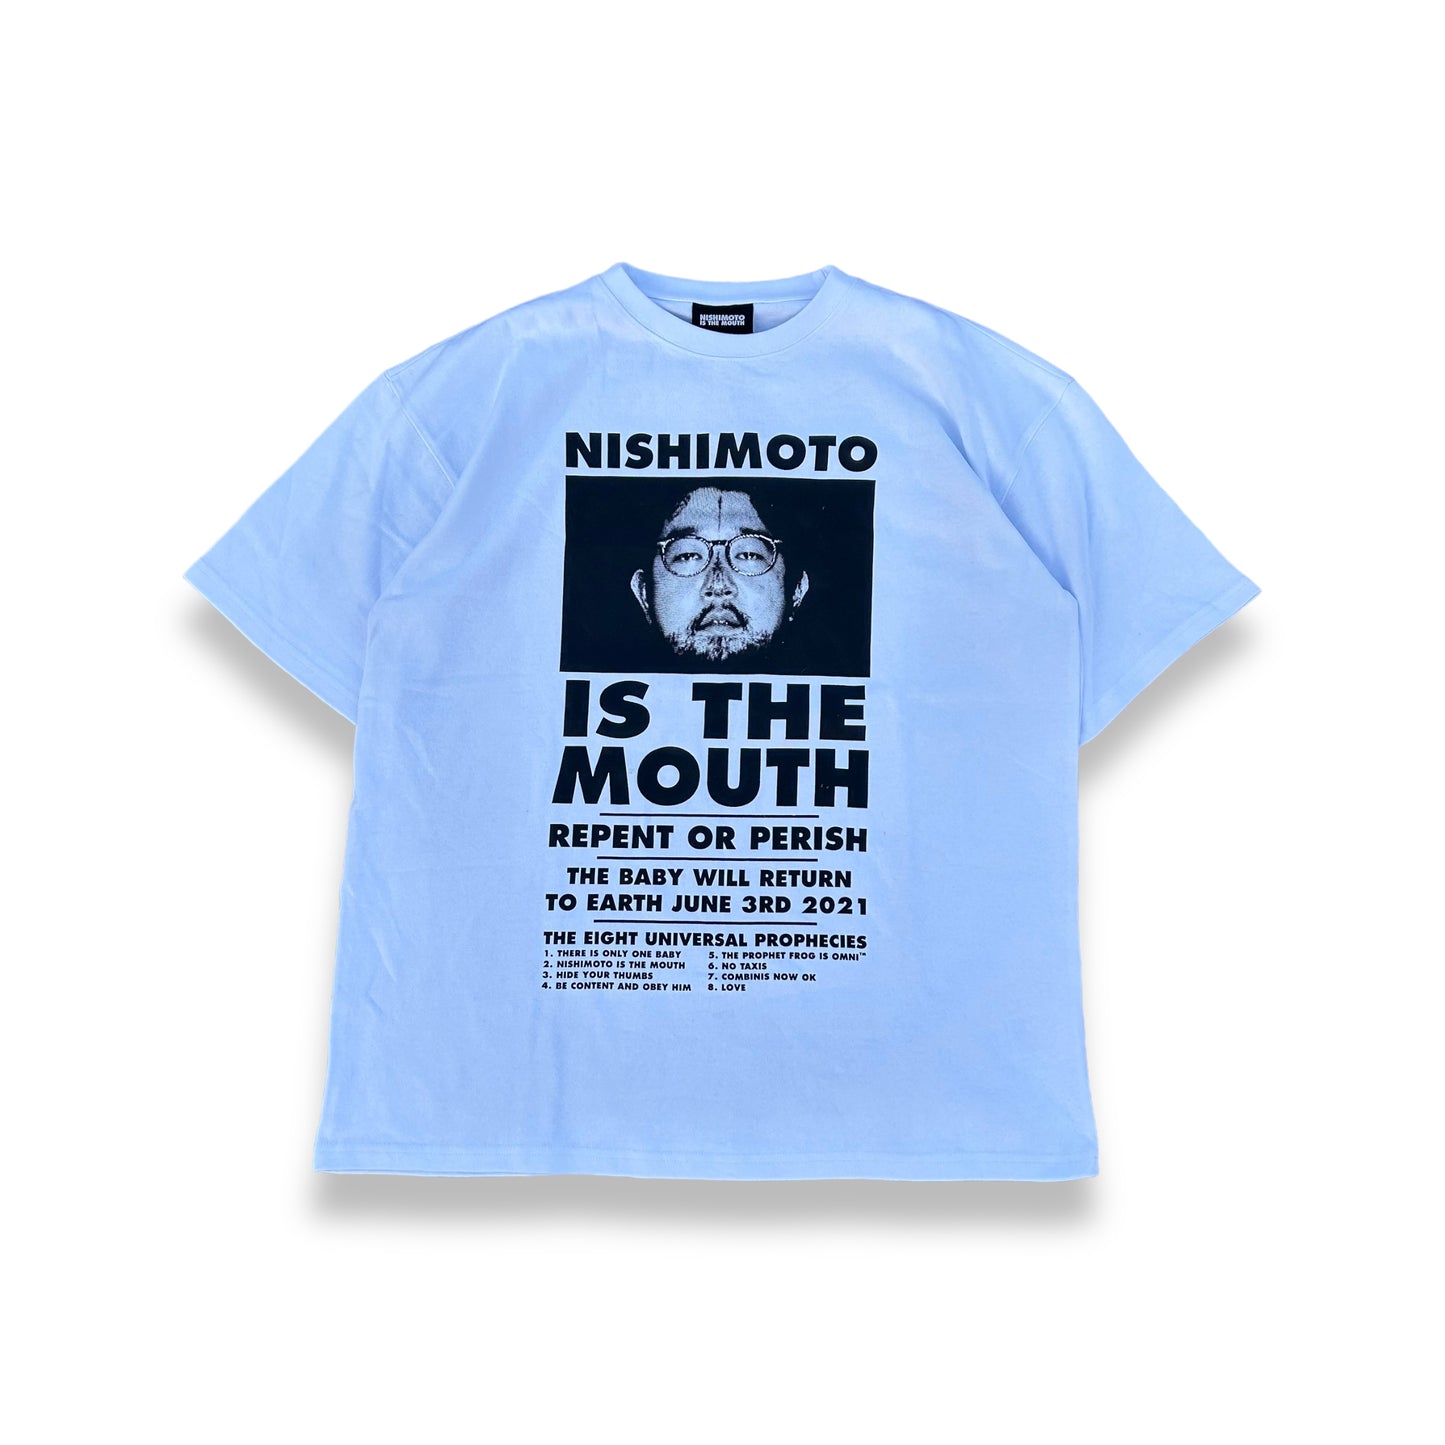 NISHIMOTO IS THE MOUTH Tee